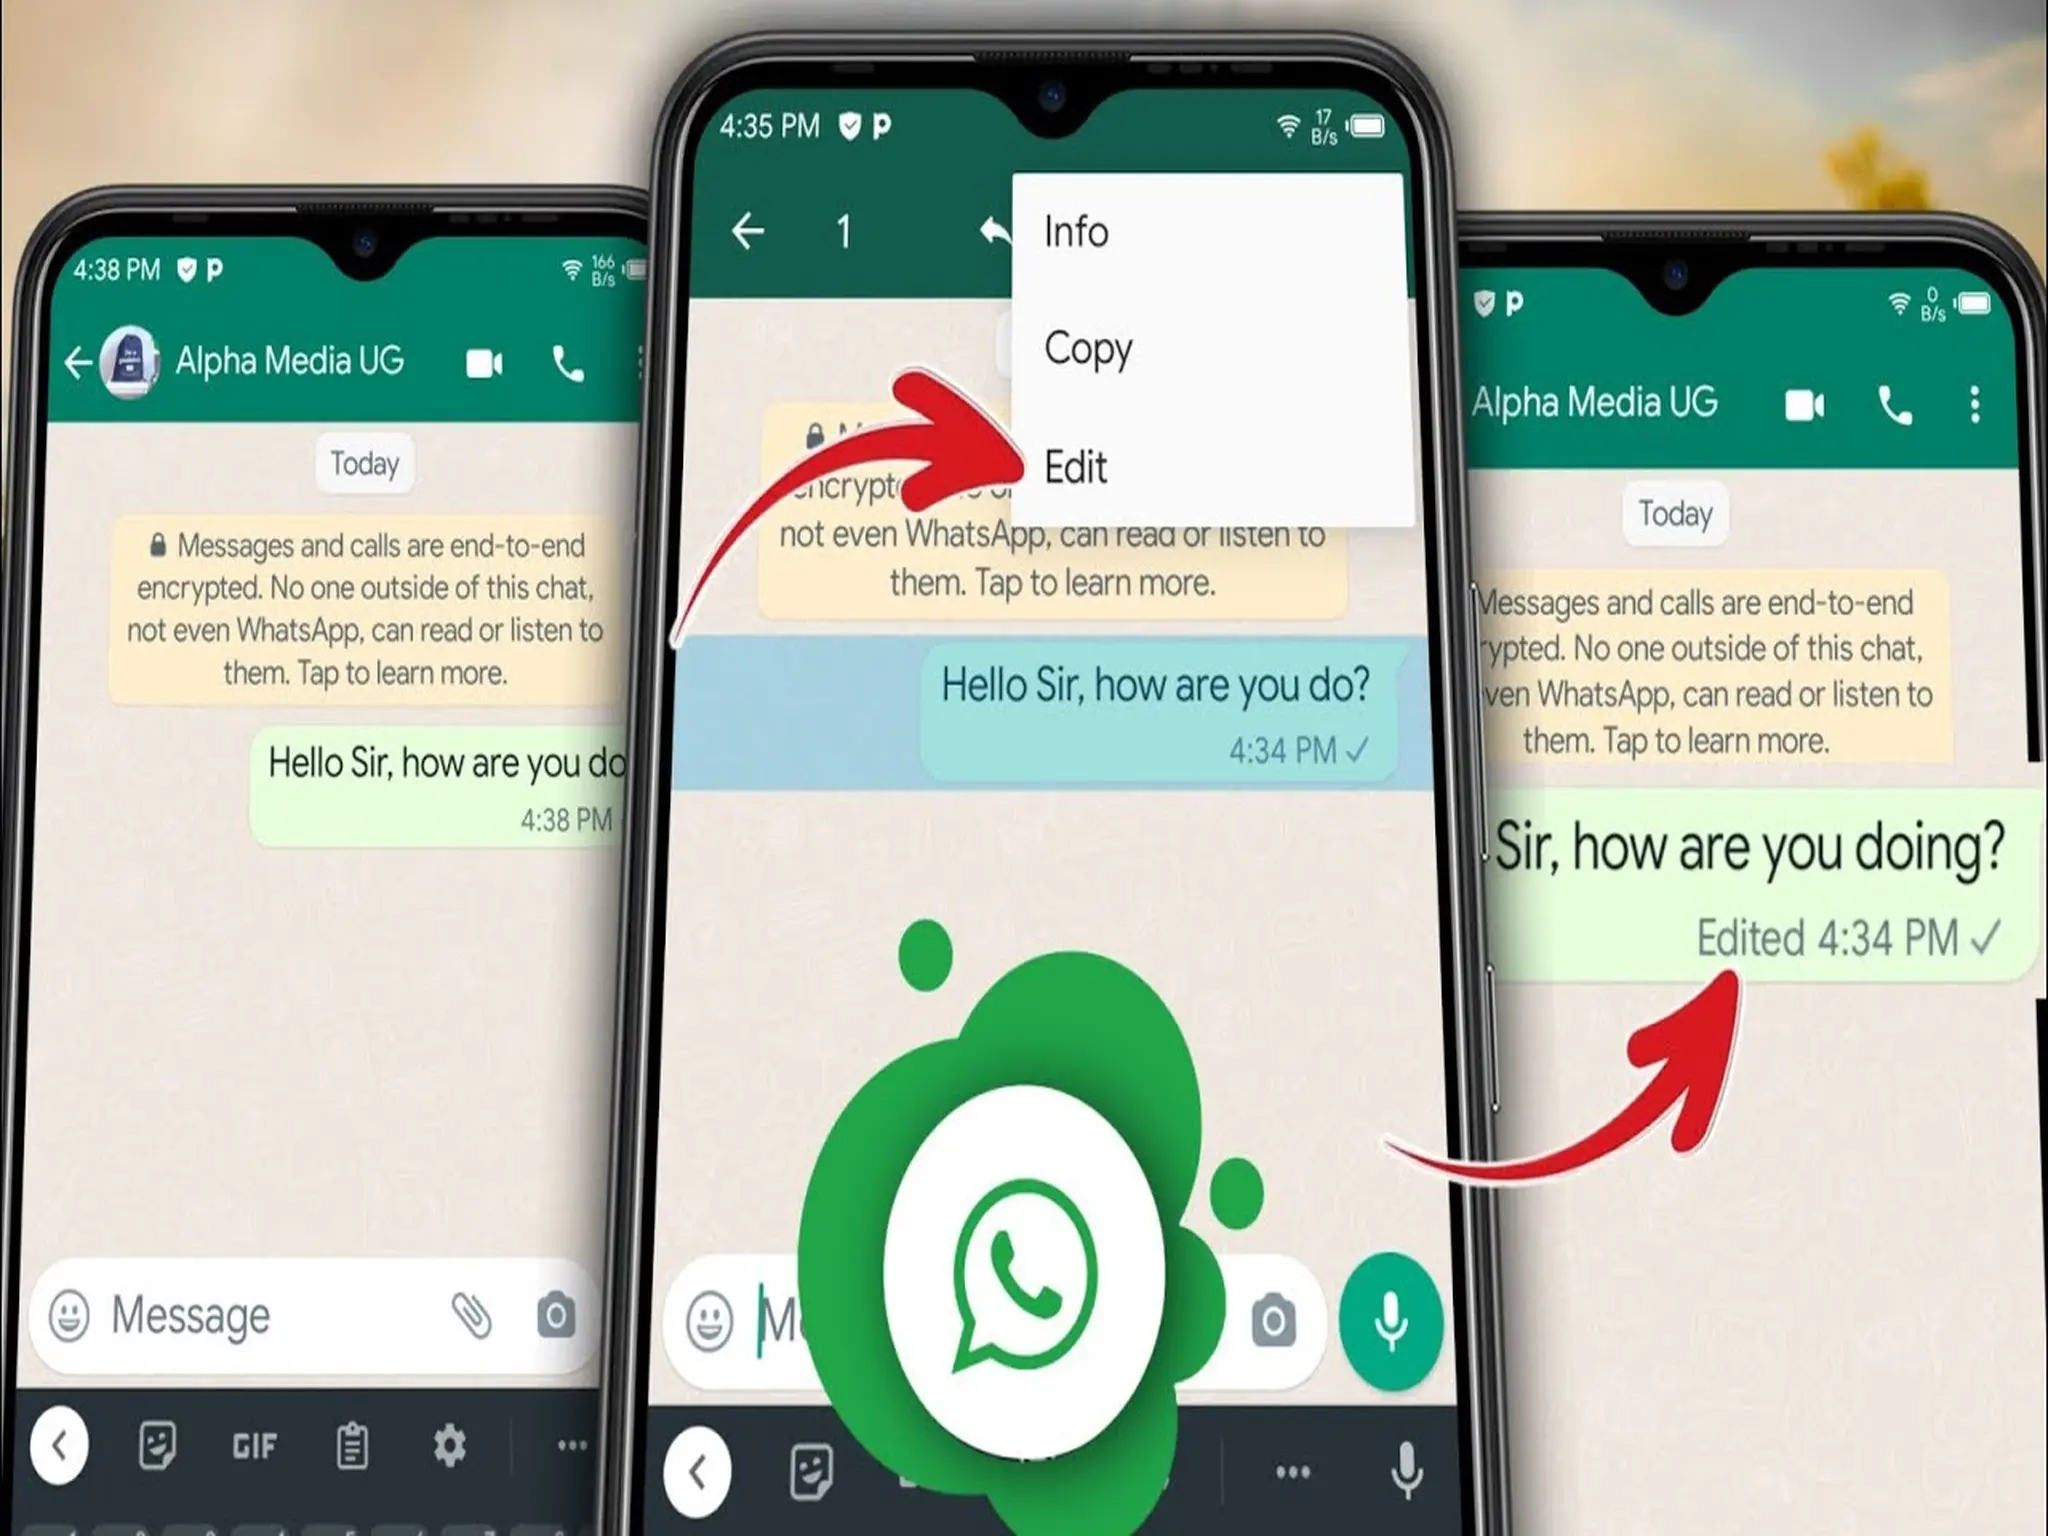 WhatsApp allows users to edit sent messages within just 15 minutes